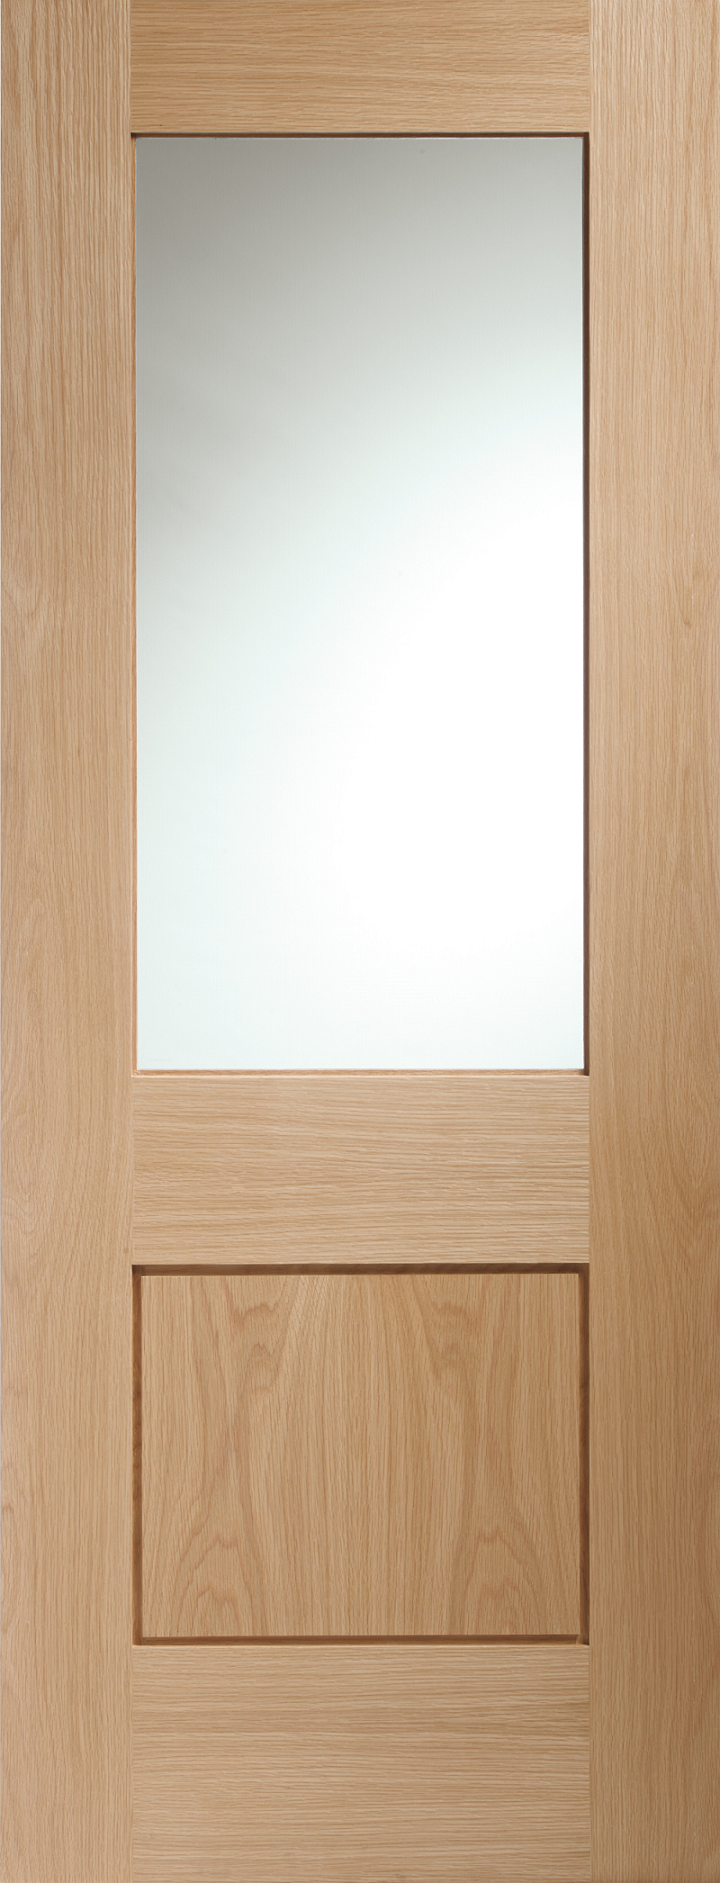 Piacenza Oak Door with Clear Glass